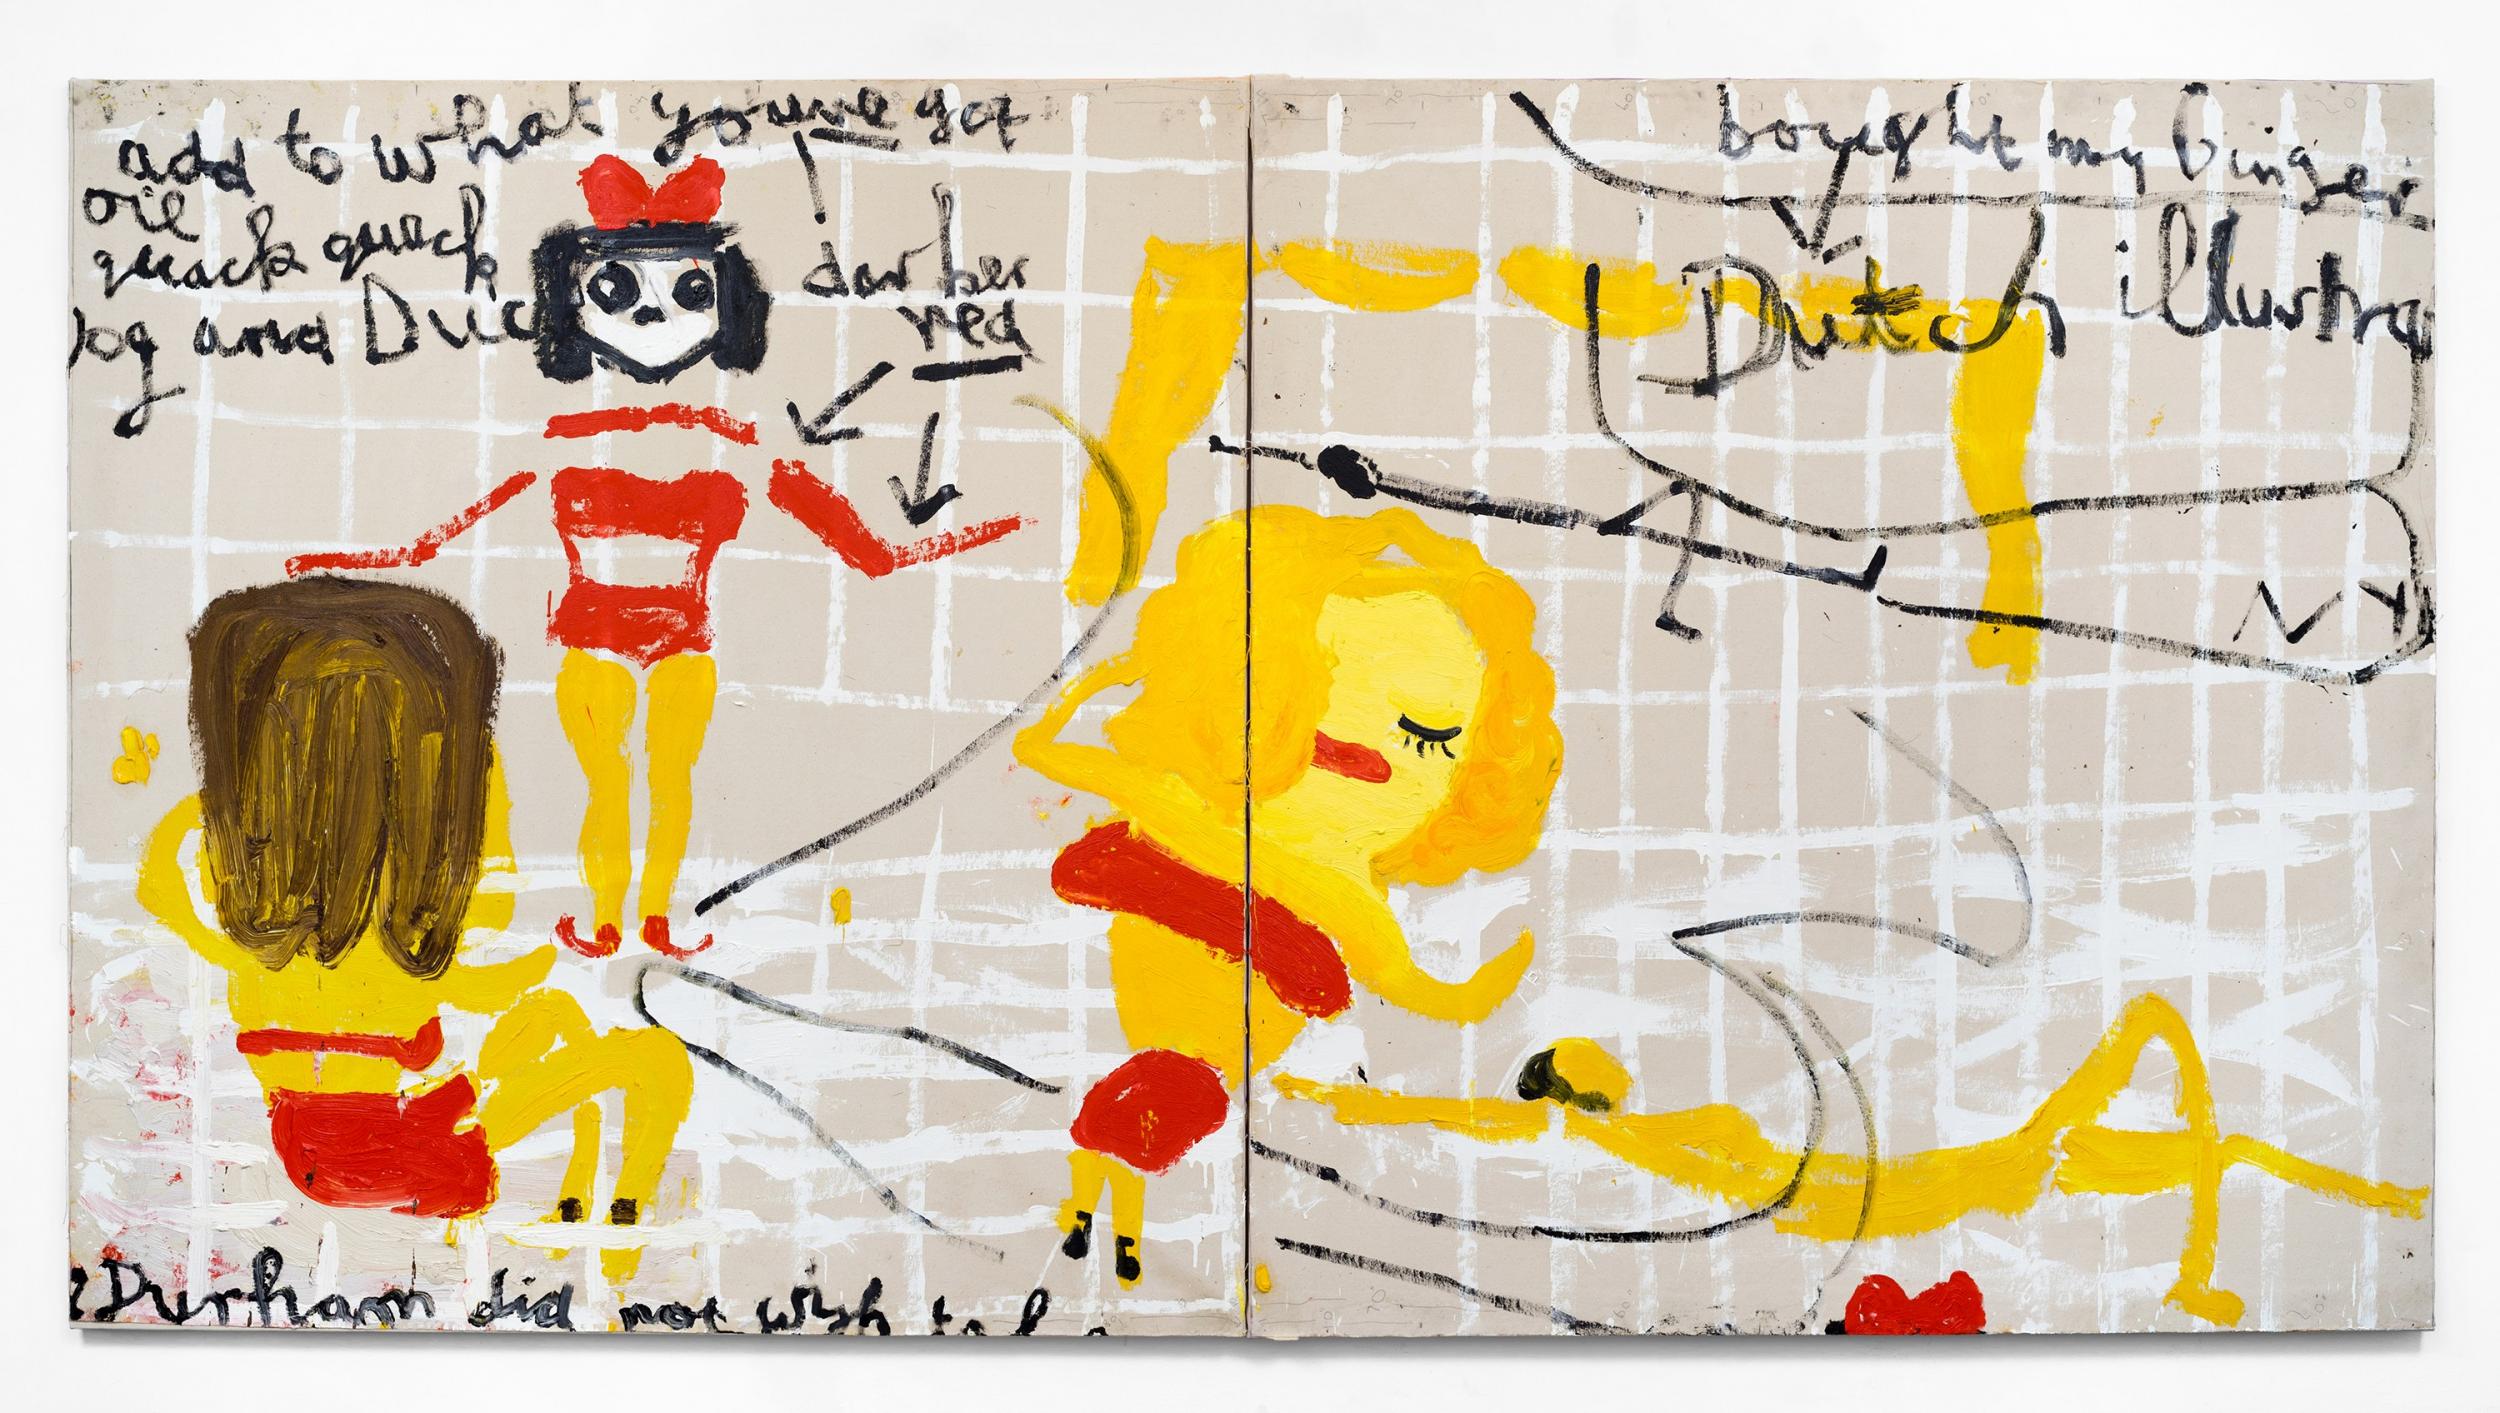 'Yellow Girls I' is a perfect example of the works: exuberant; wacky; and brashly cartoony